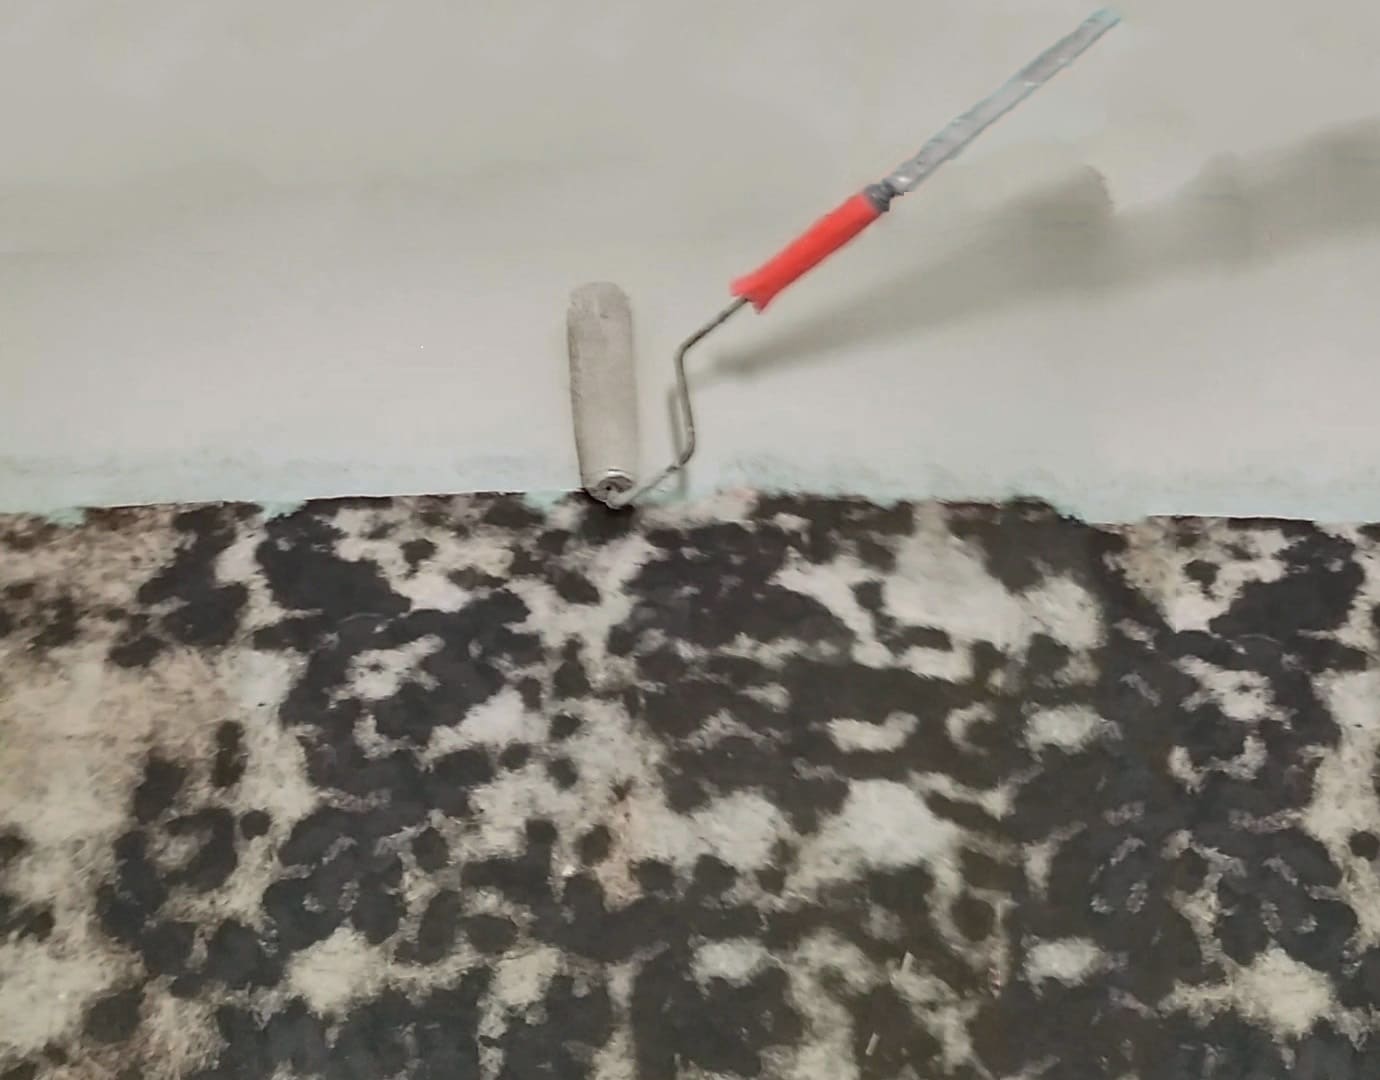 How To Remove Black Adhesive From Wall